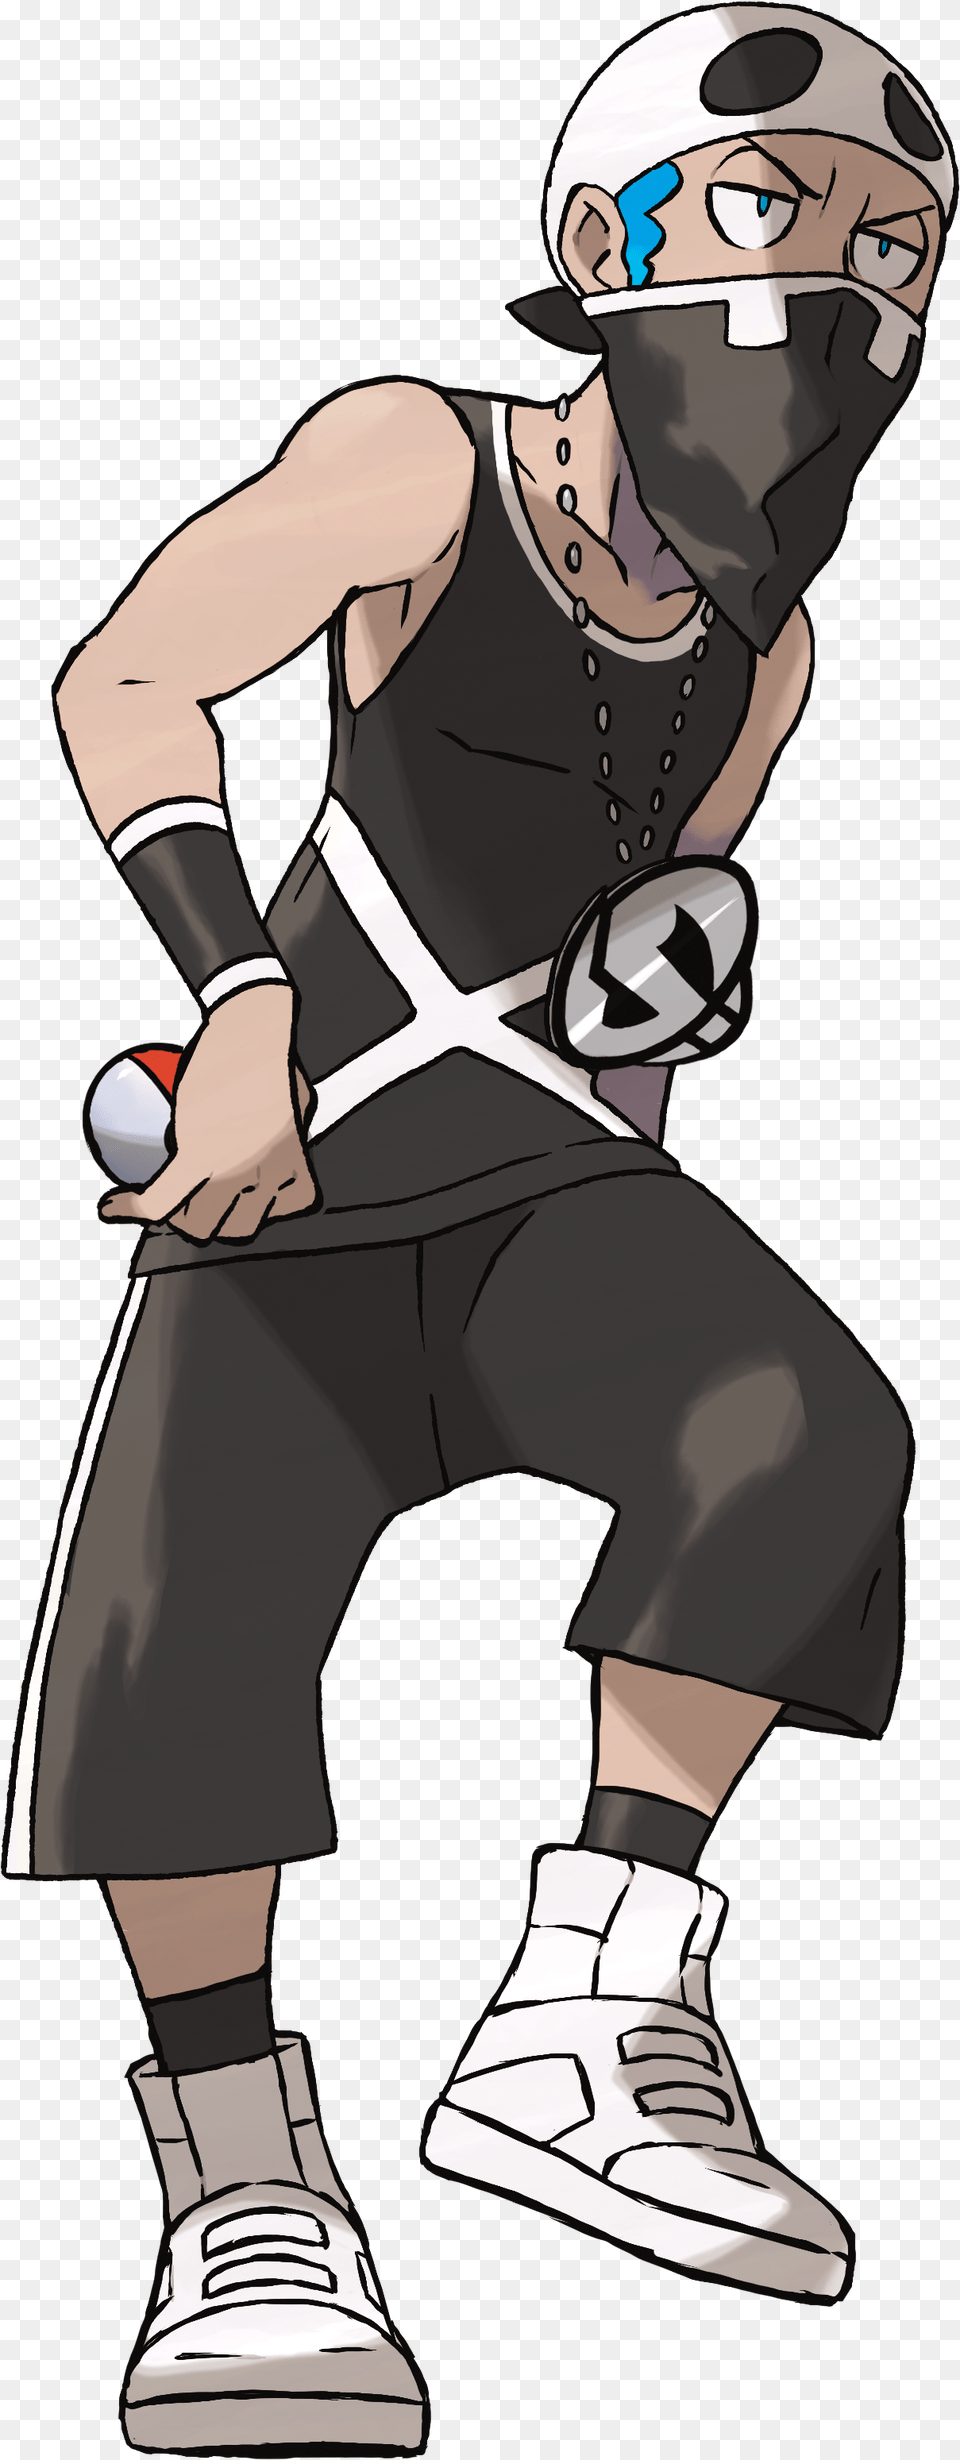 Guzma Is The Boss Of Team Skull The One Who Holds Pokemon Team Skull Grunt, Book, Clothing, Comics, Shoe Png